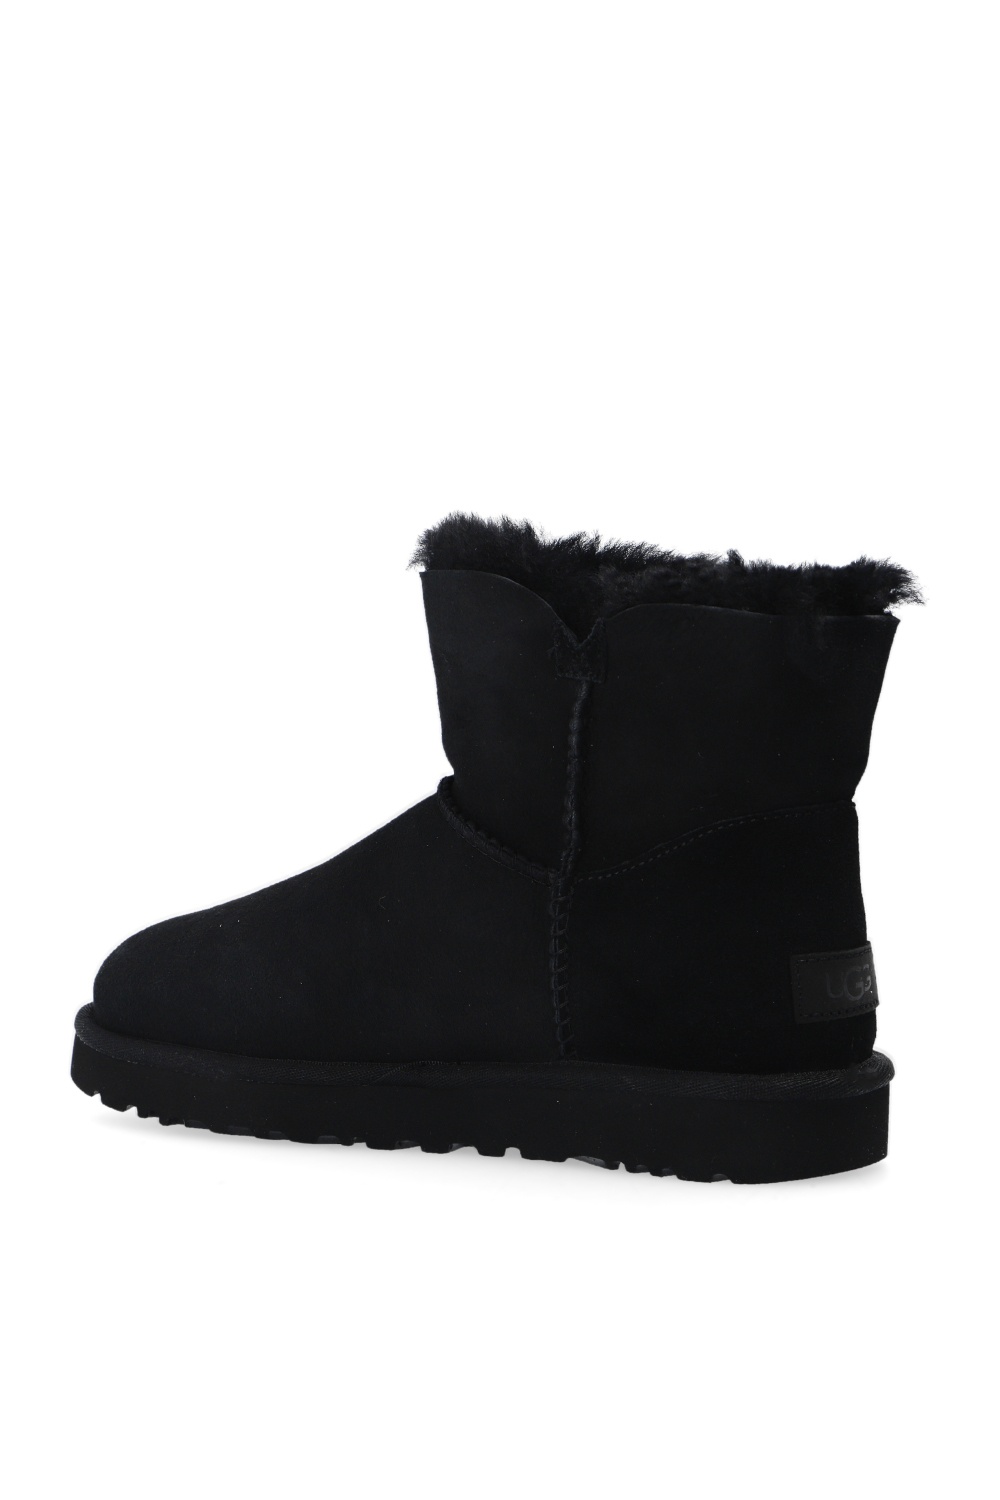 UGG 'Mini Bailey Button II' suede snow boots